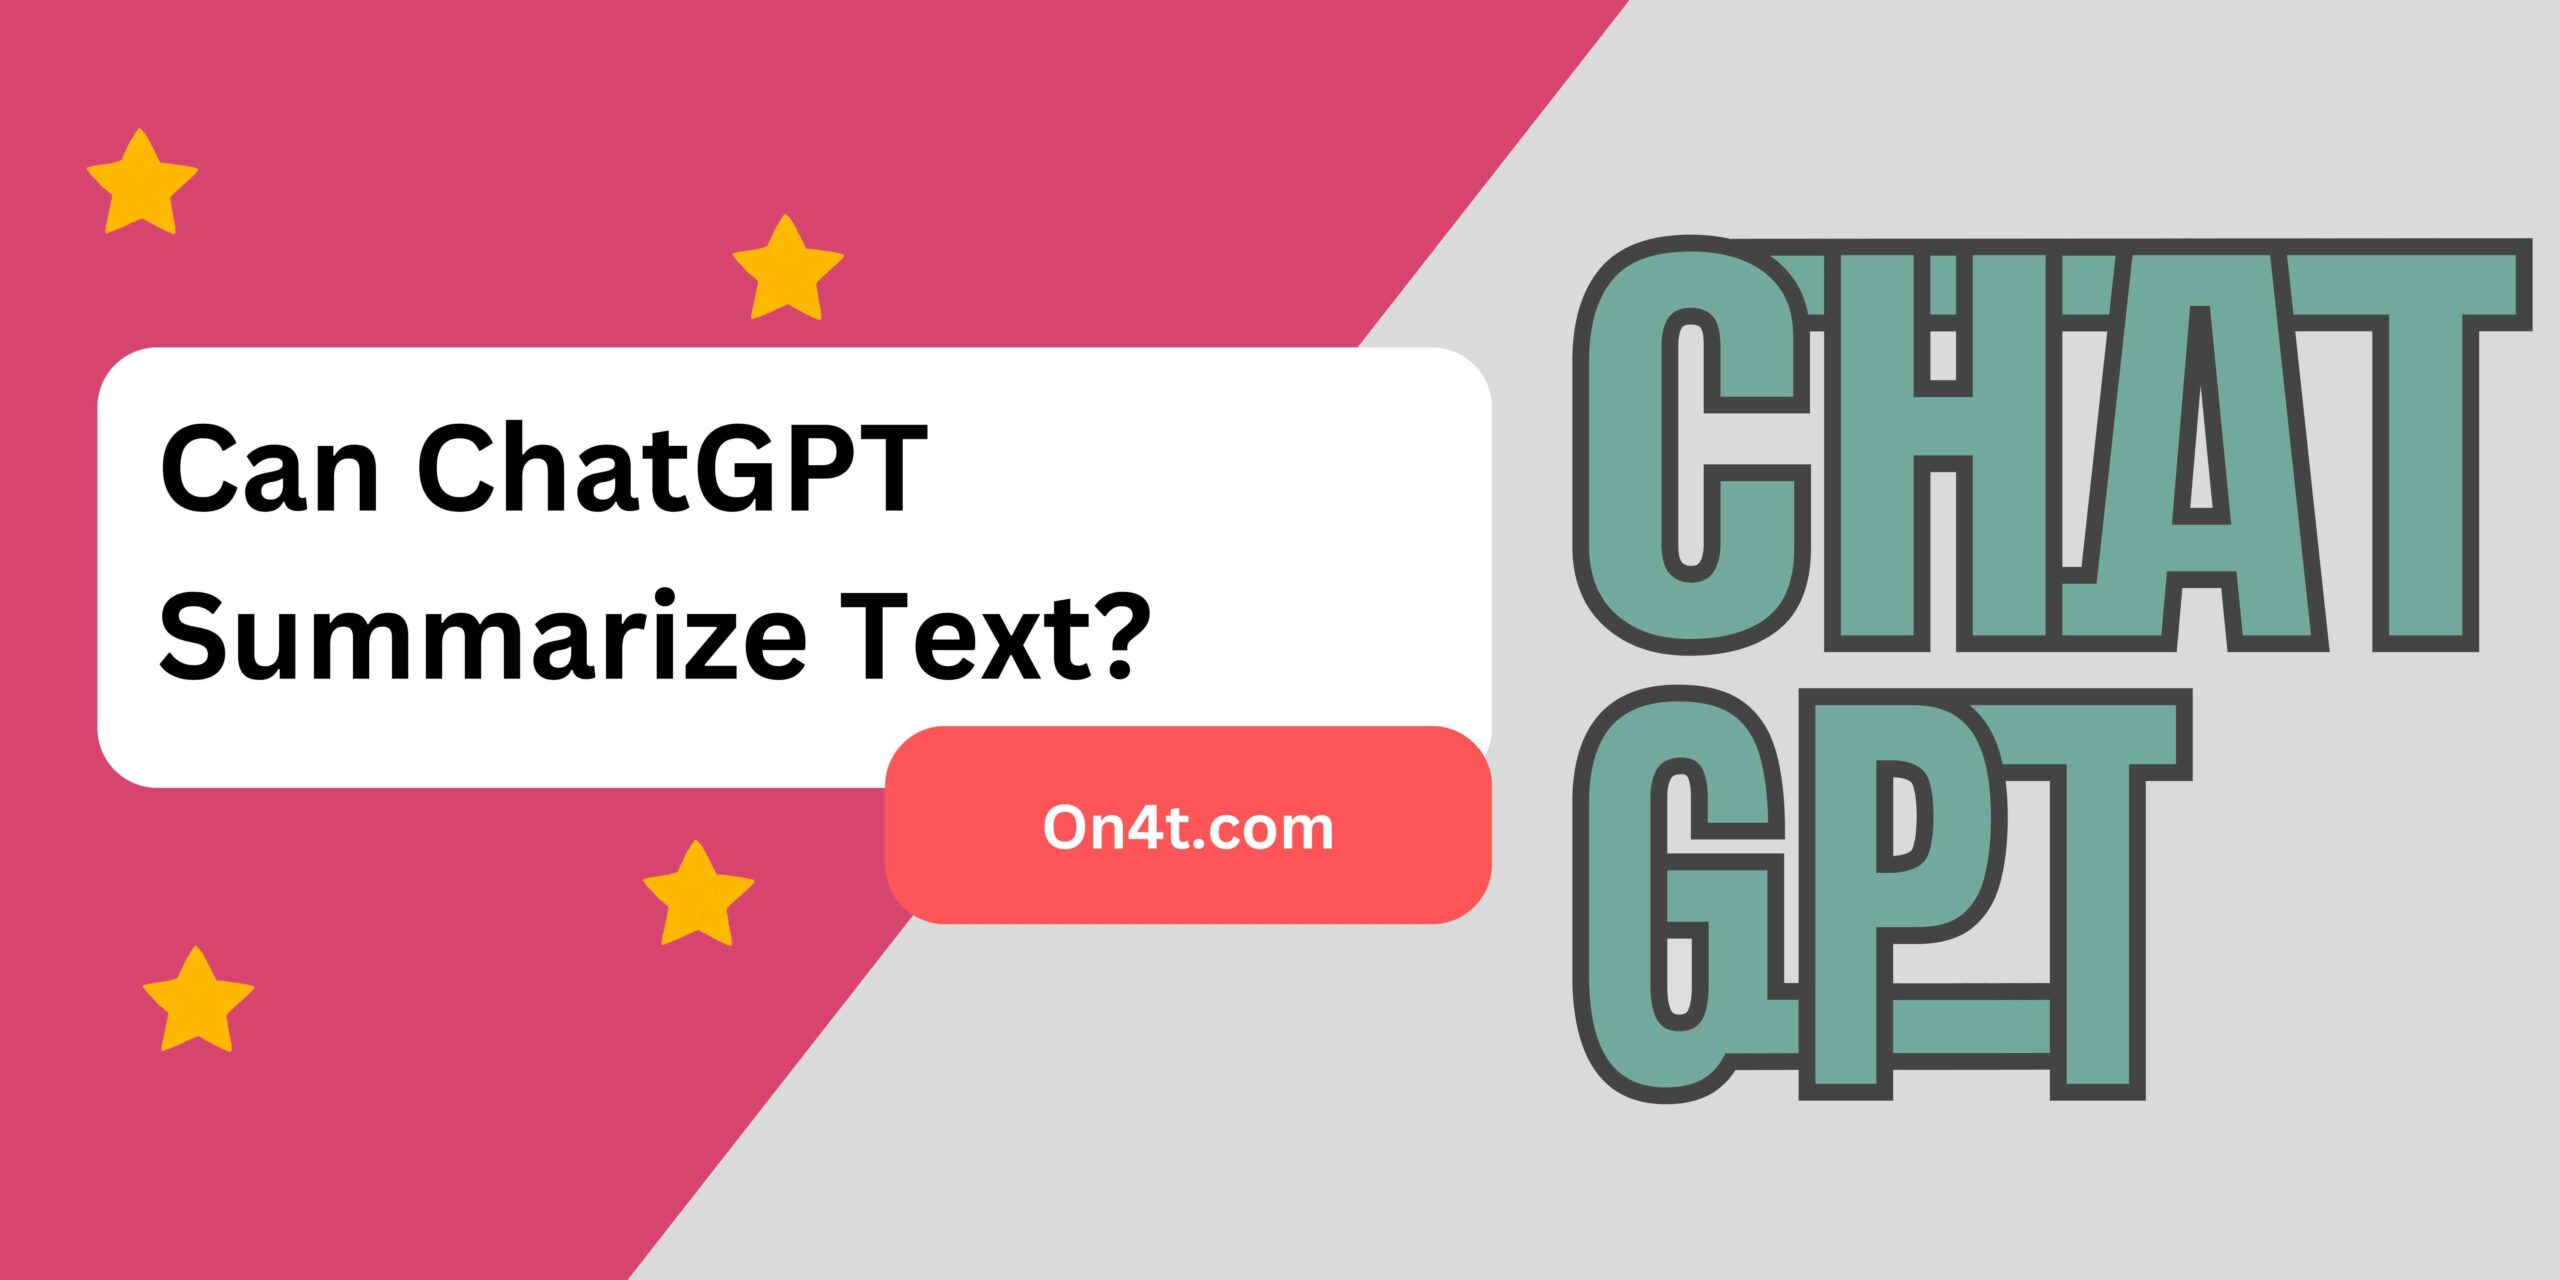 Can ChatGPT Summarize Text?